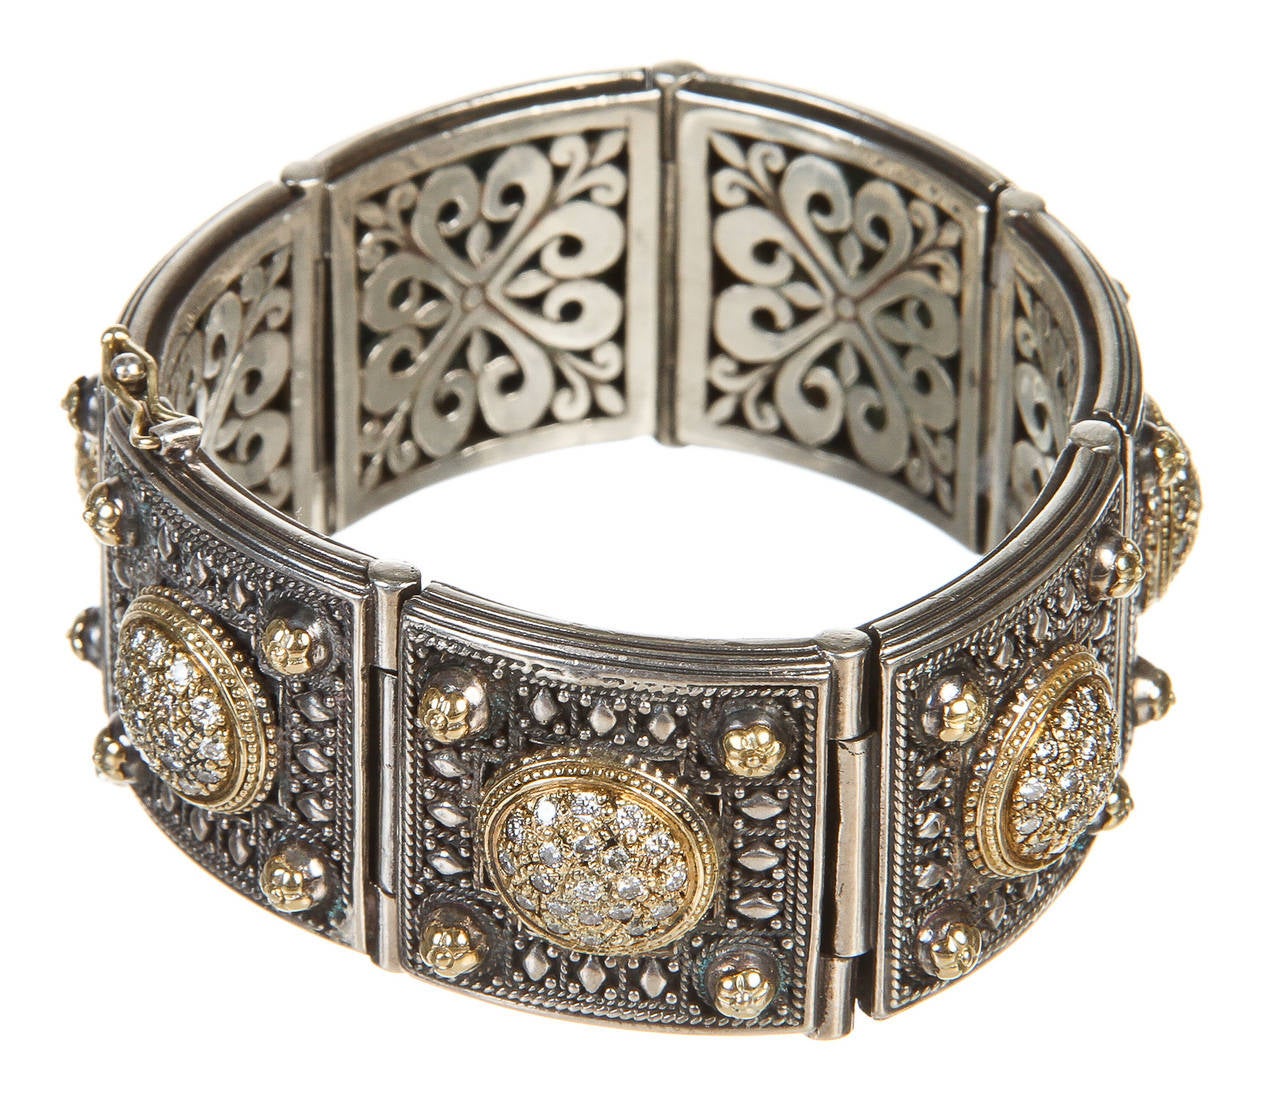 Featured here at Onquestyle is this beautiful Konstantino bracelet, crafted from a mix of 18k gold, sterling silver and diamonds.